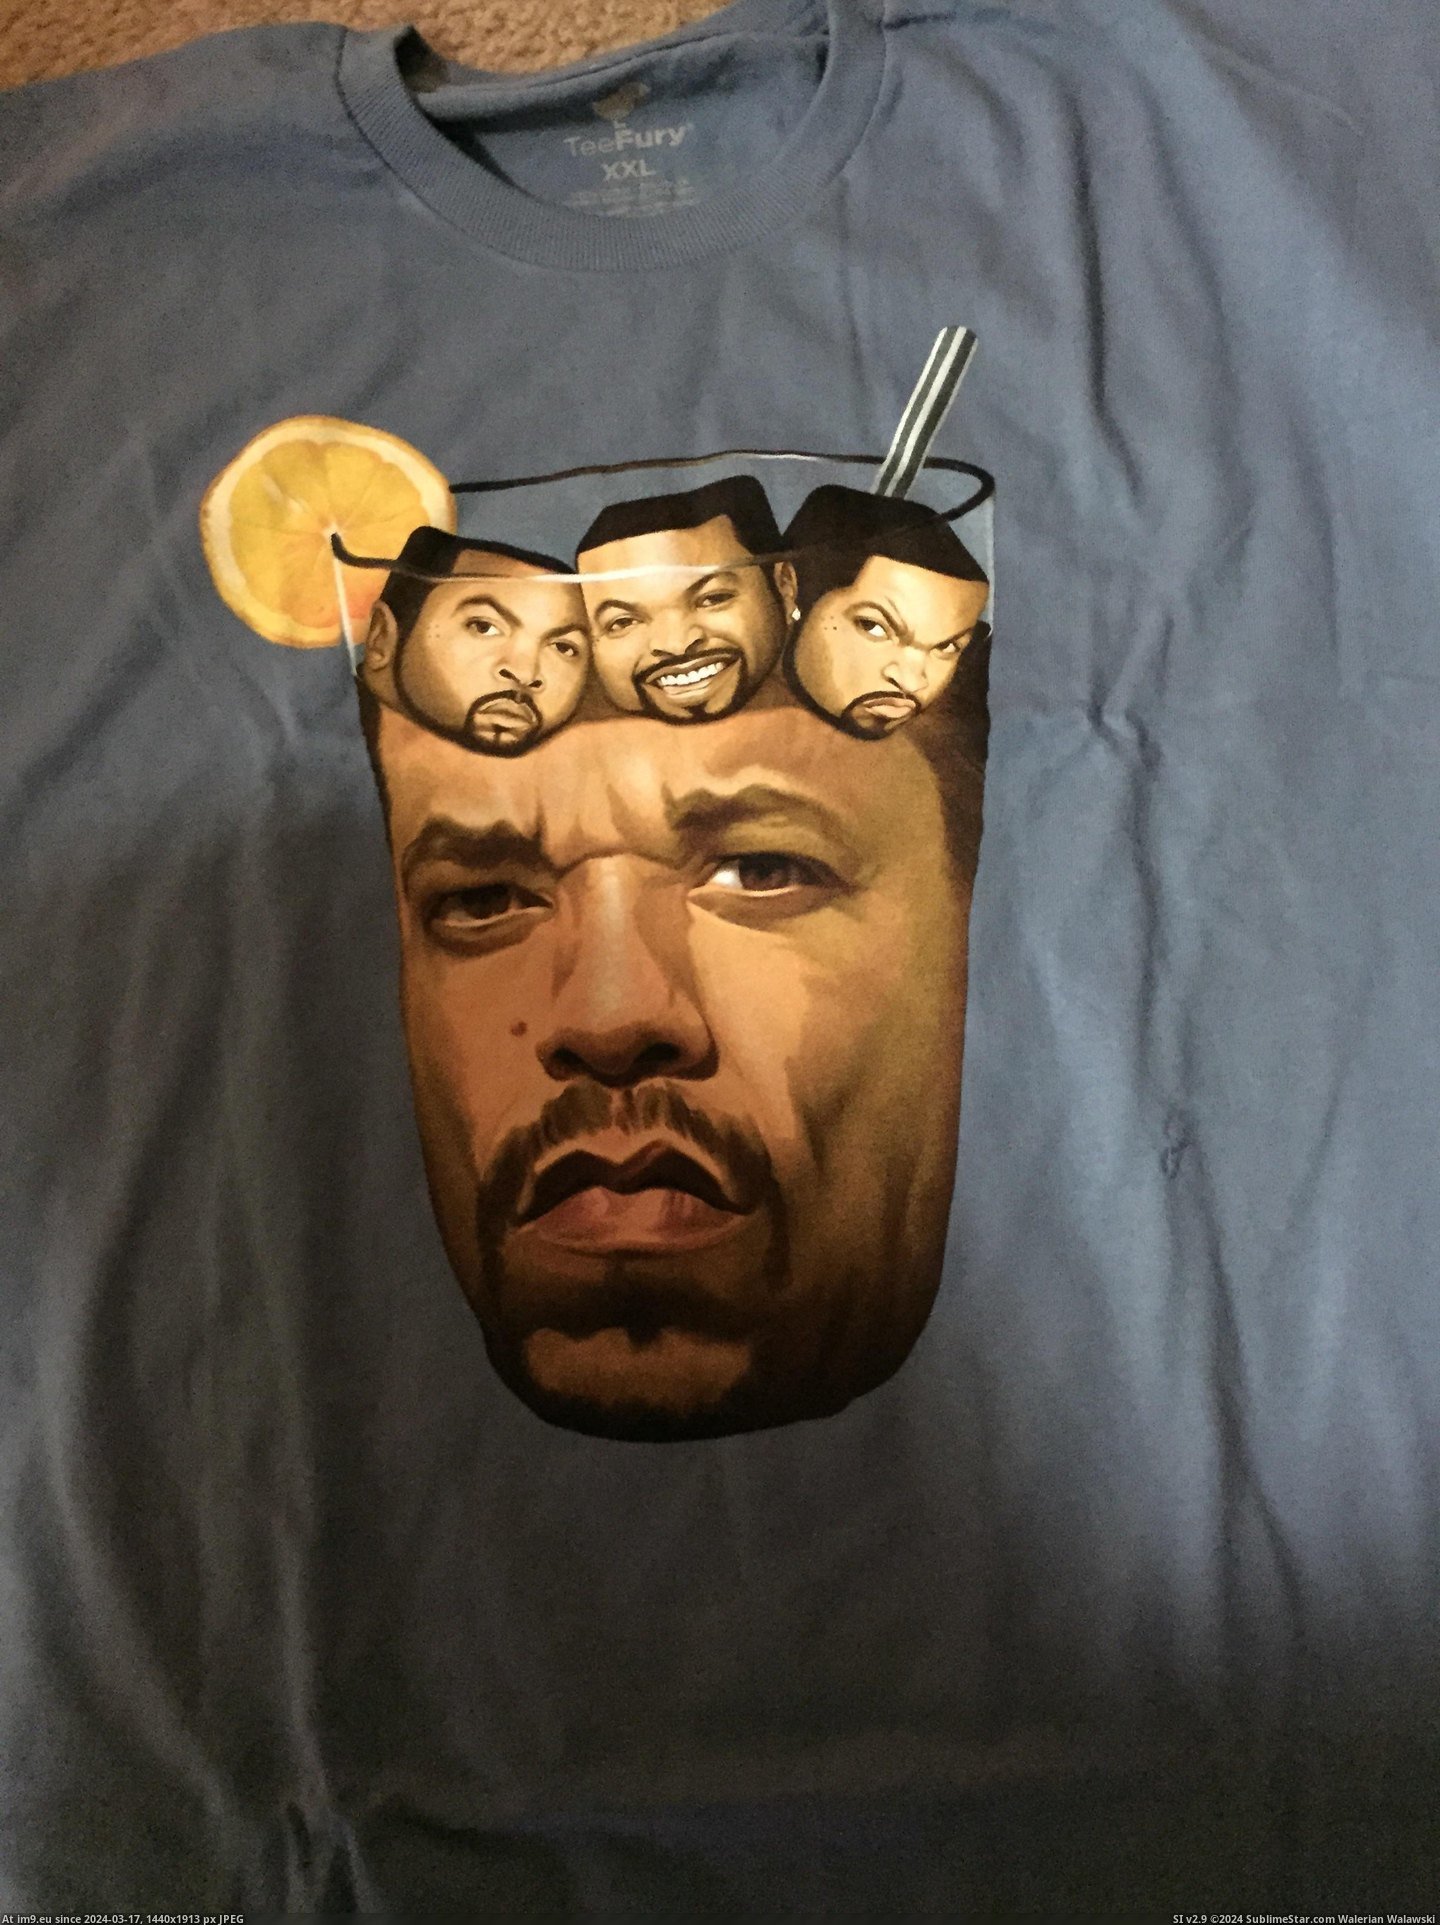 #Funny #Brother #Shirt [Funny] My brother's new shirt Pic. (Bild von album My r/FUNNY favs))